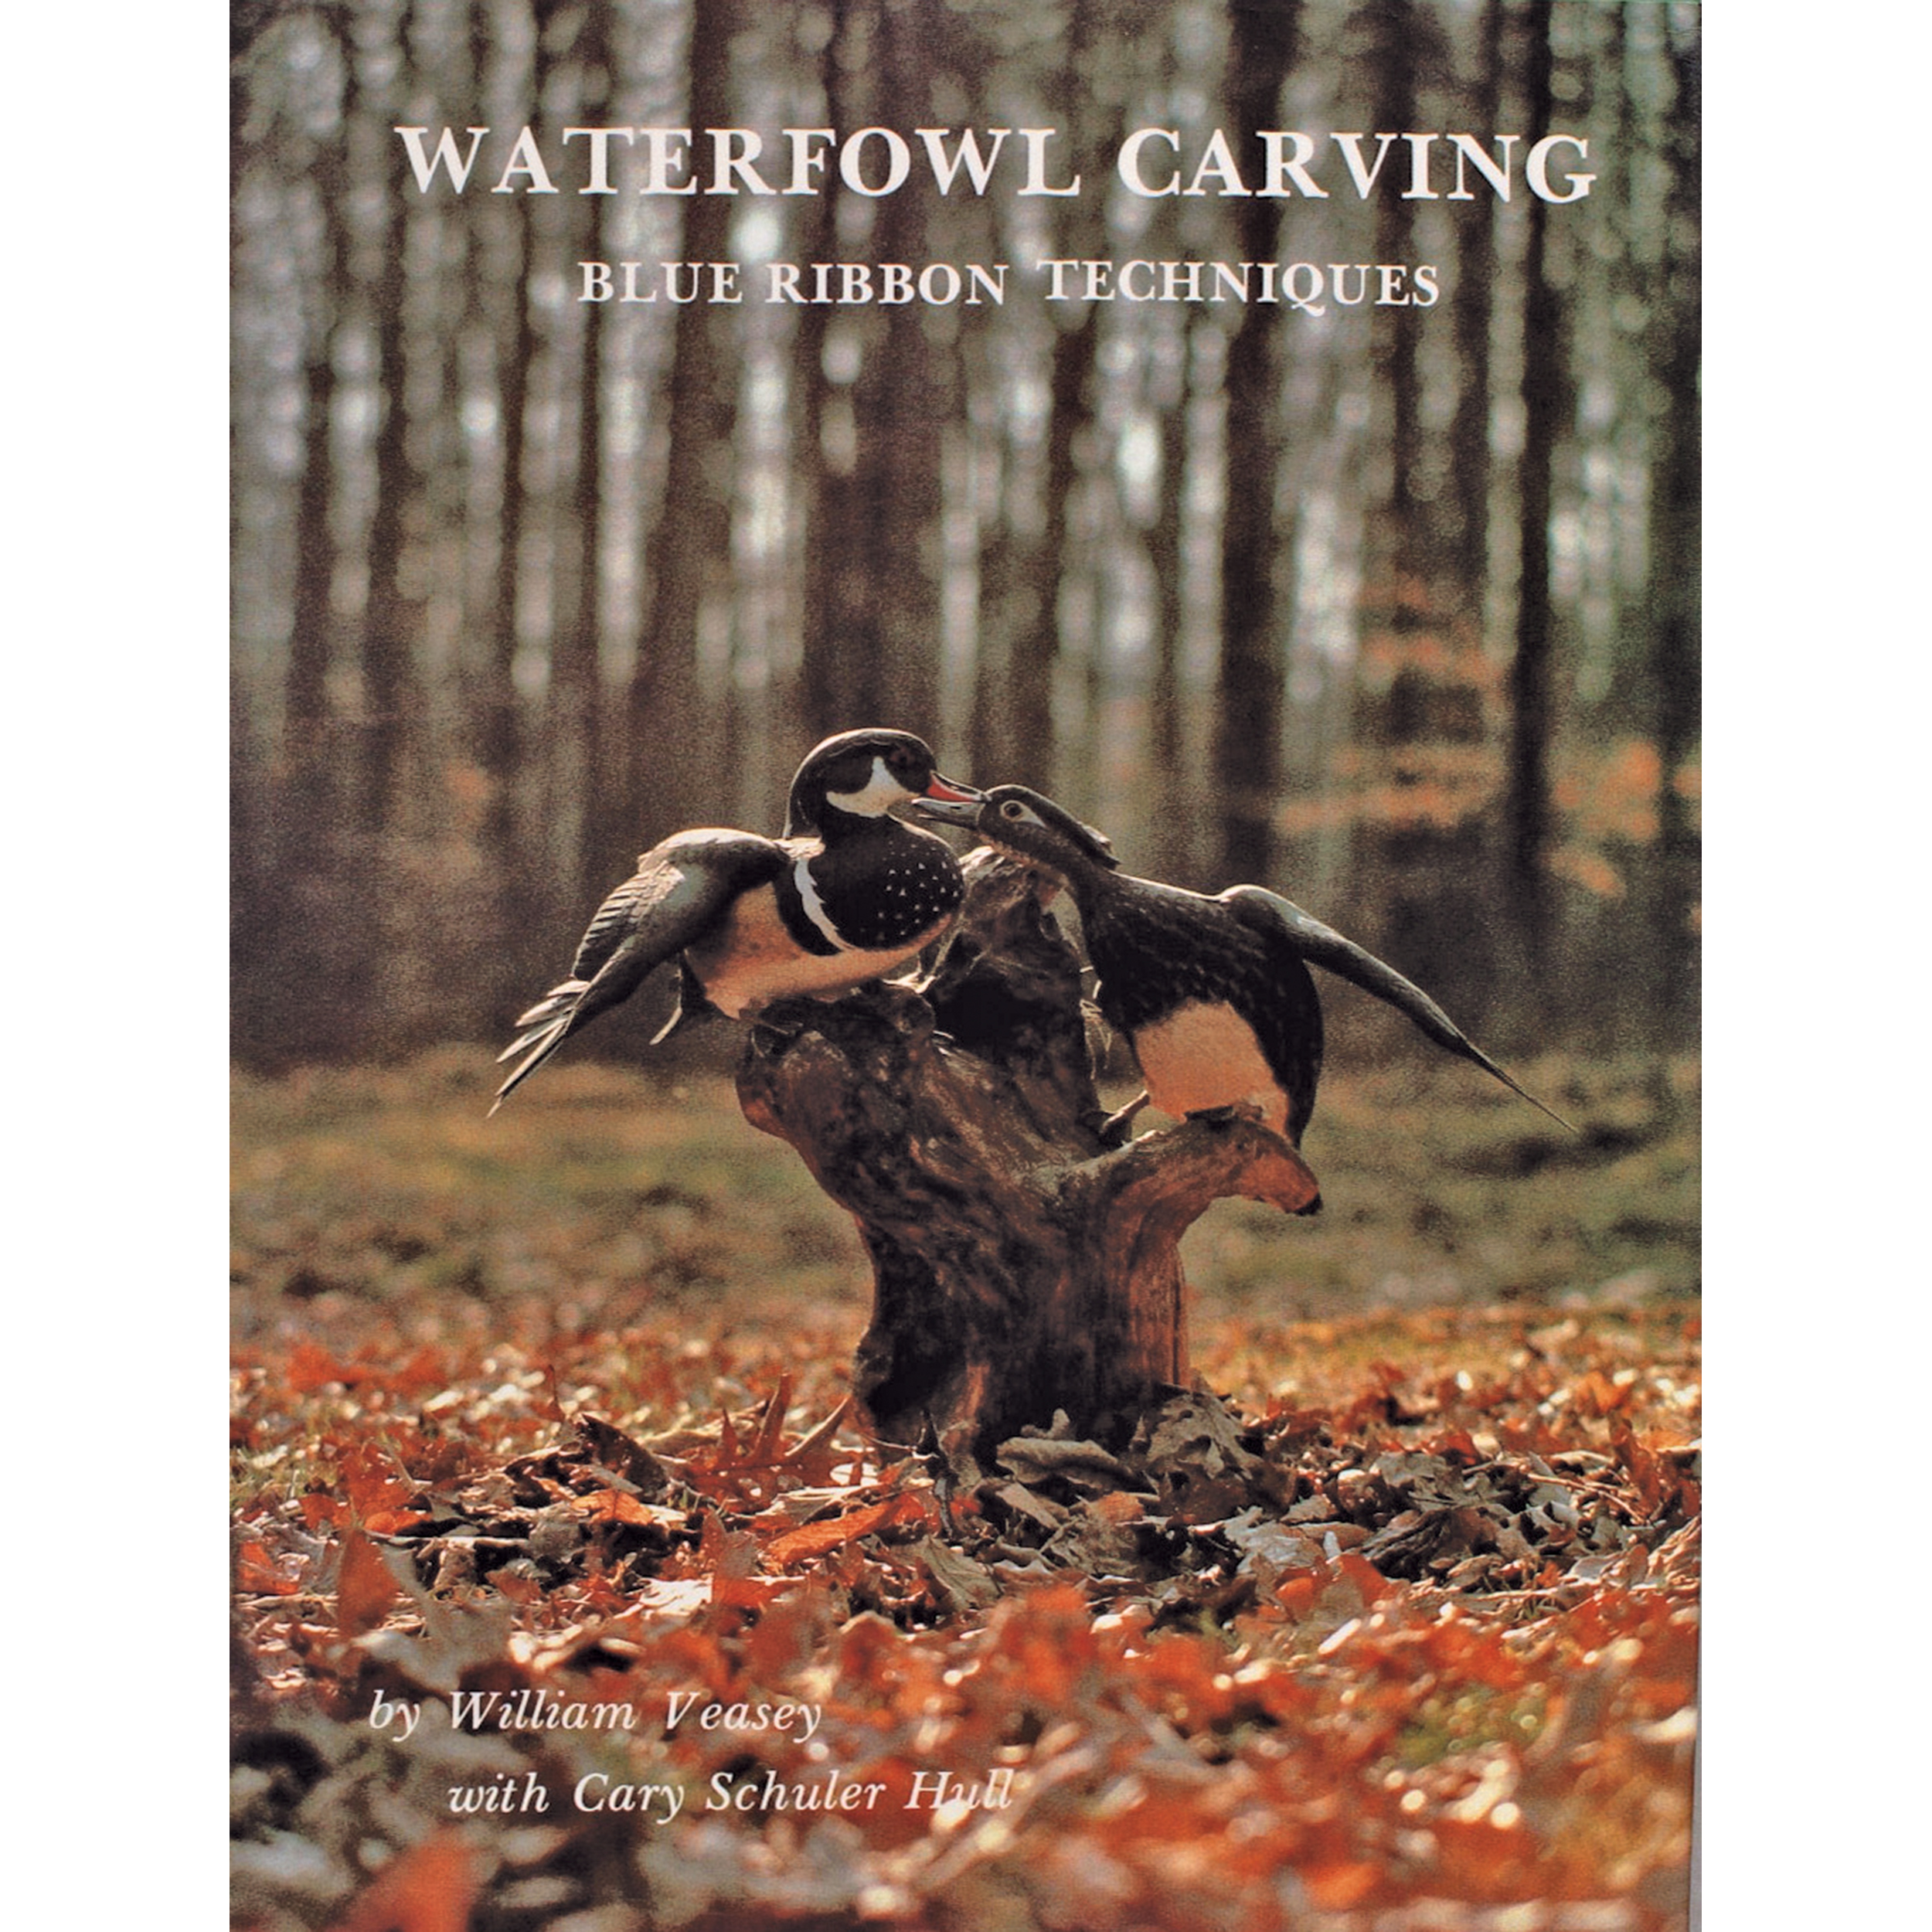 Waterfowl Carving: Blue Ribbon Techniques